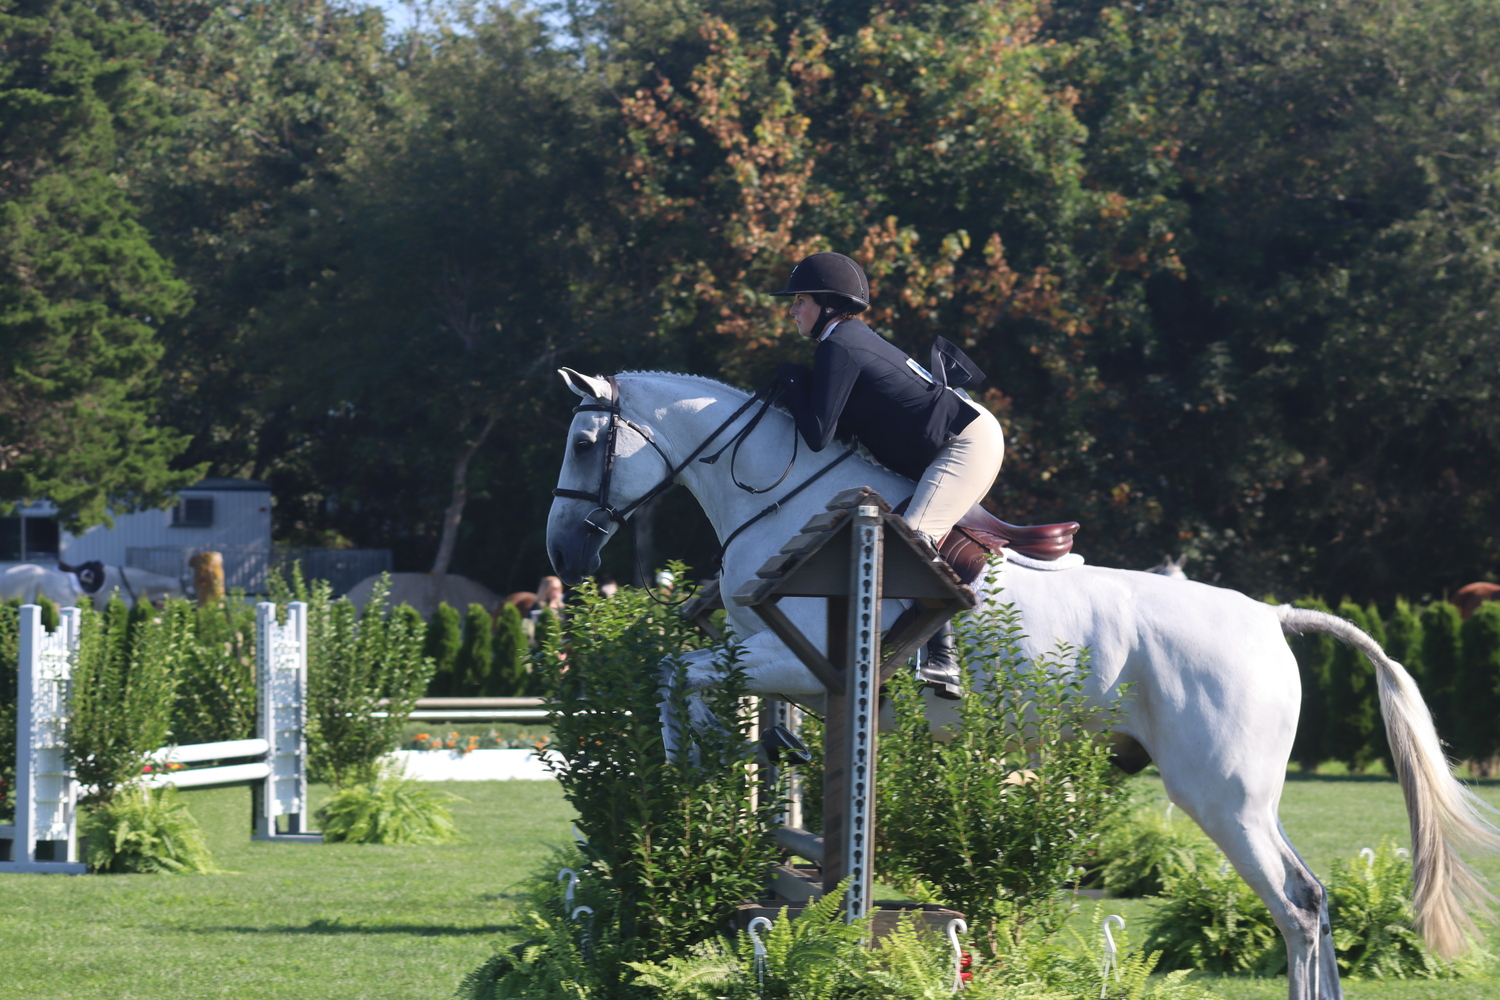 East Quogue resident Kelly Sleece and her horse, Inspired, in the adult equitation division. CAILIN RILEY